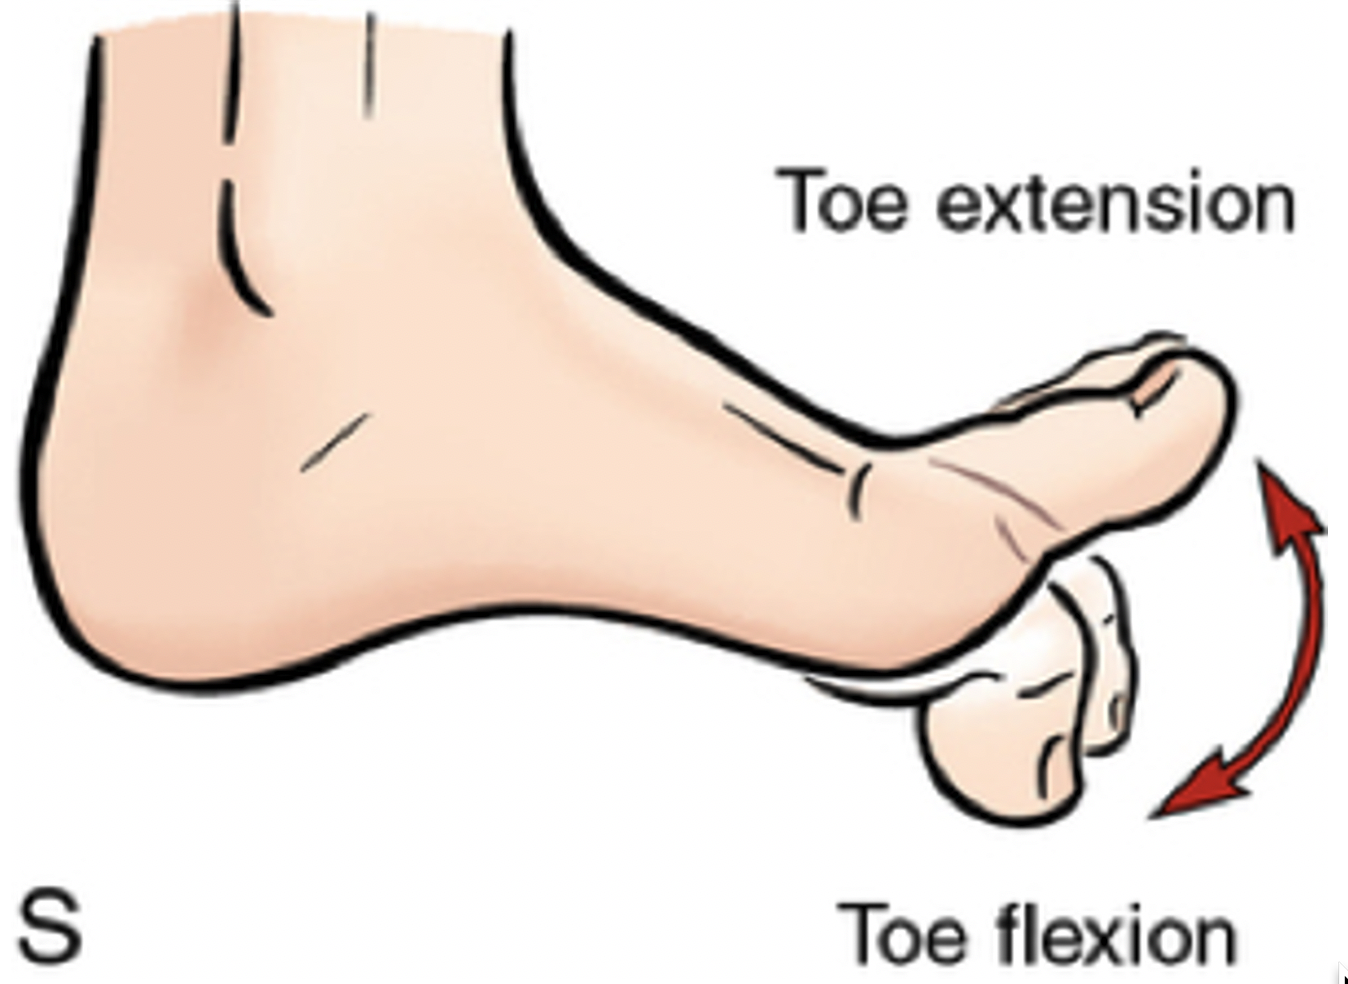 Evaluation Of Great Toe Extension Strength Using A Novel Portable ...